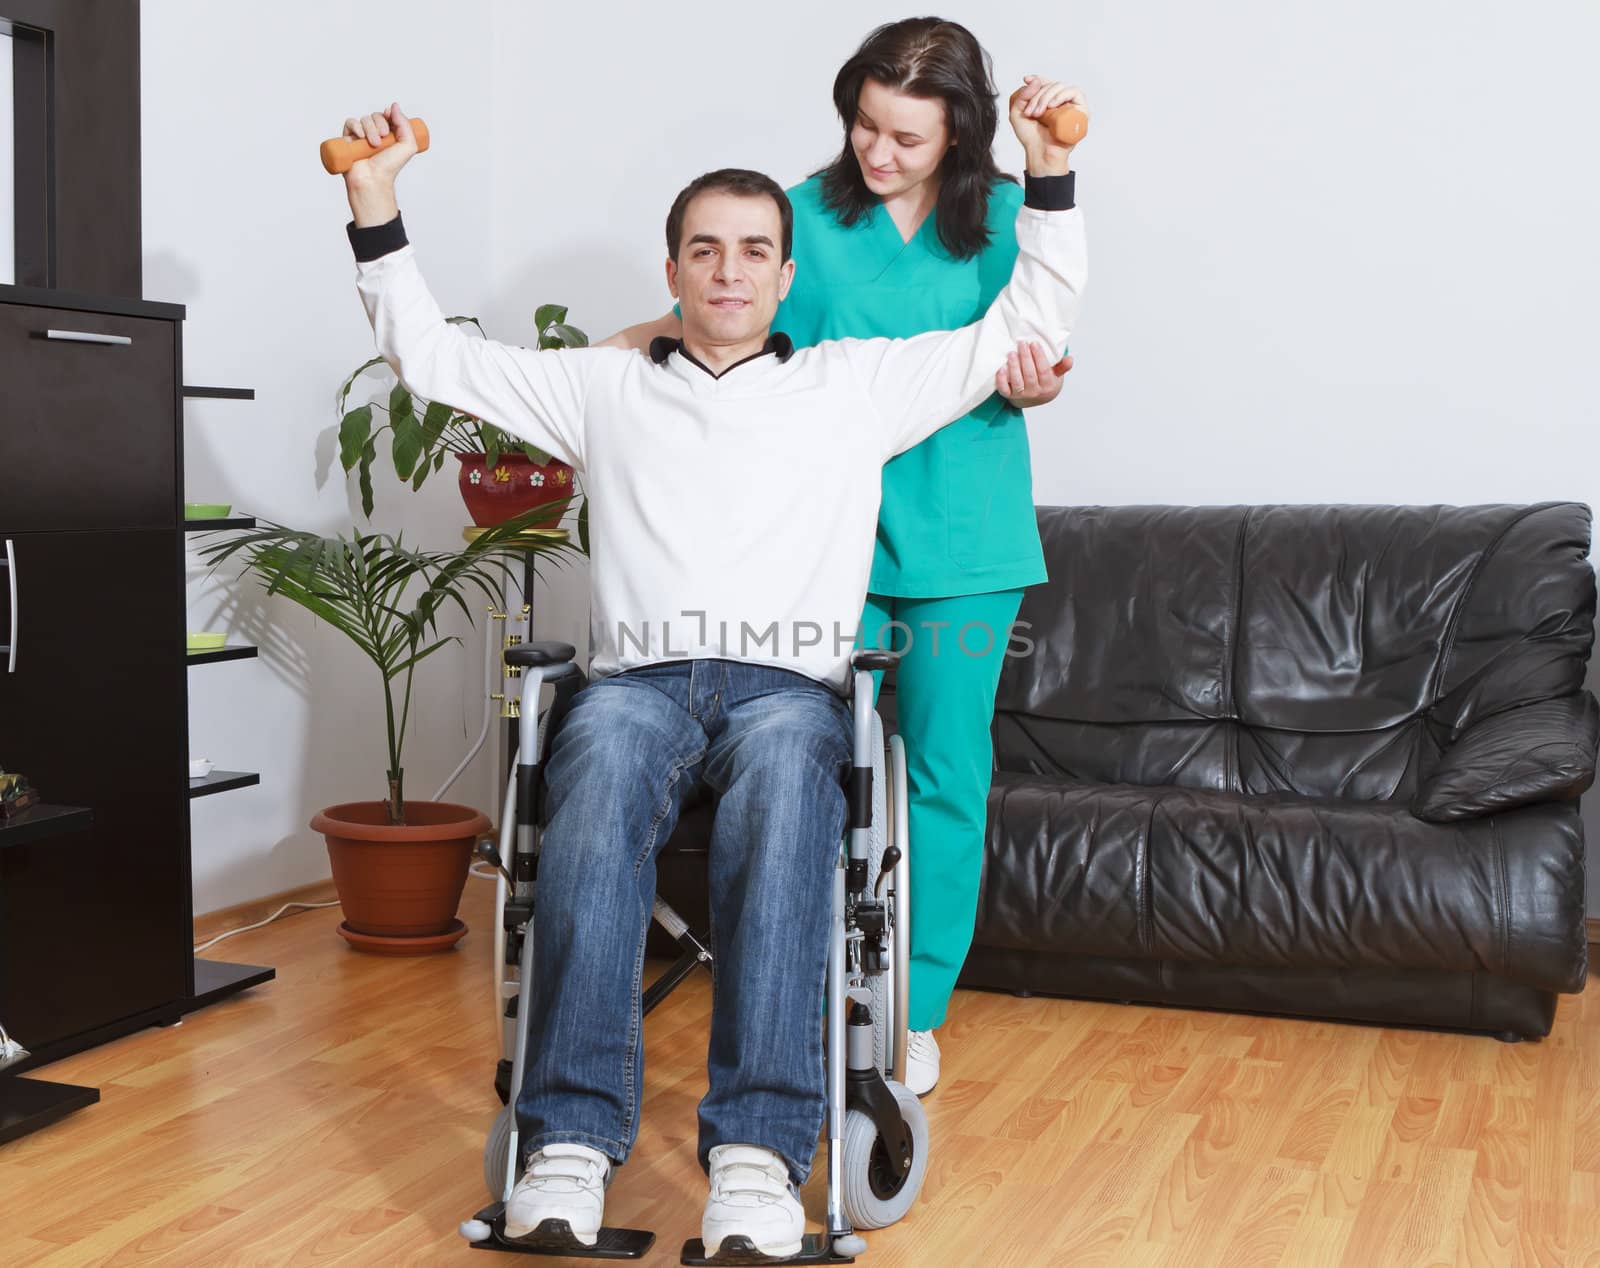 Physical therapist working with patient by manaemedia